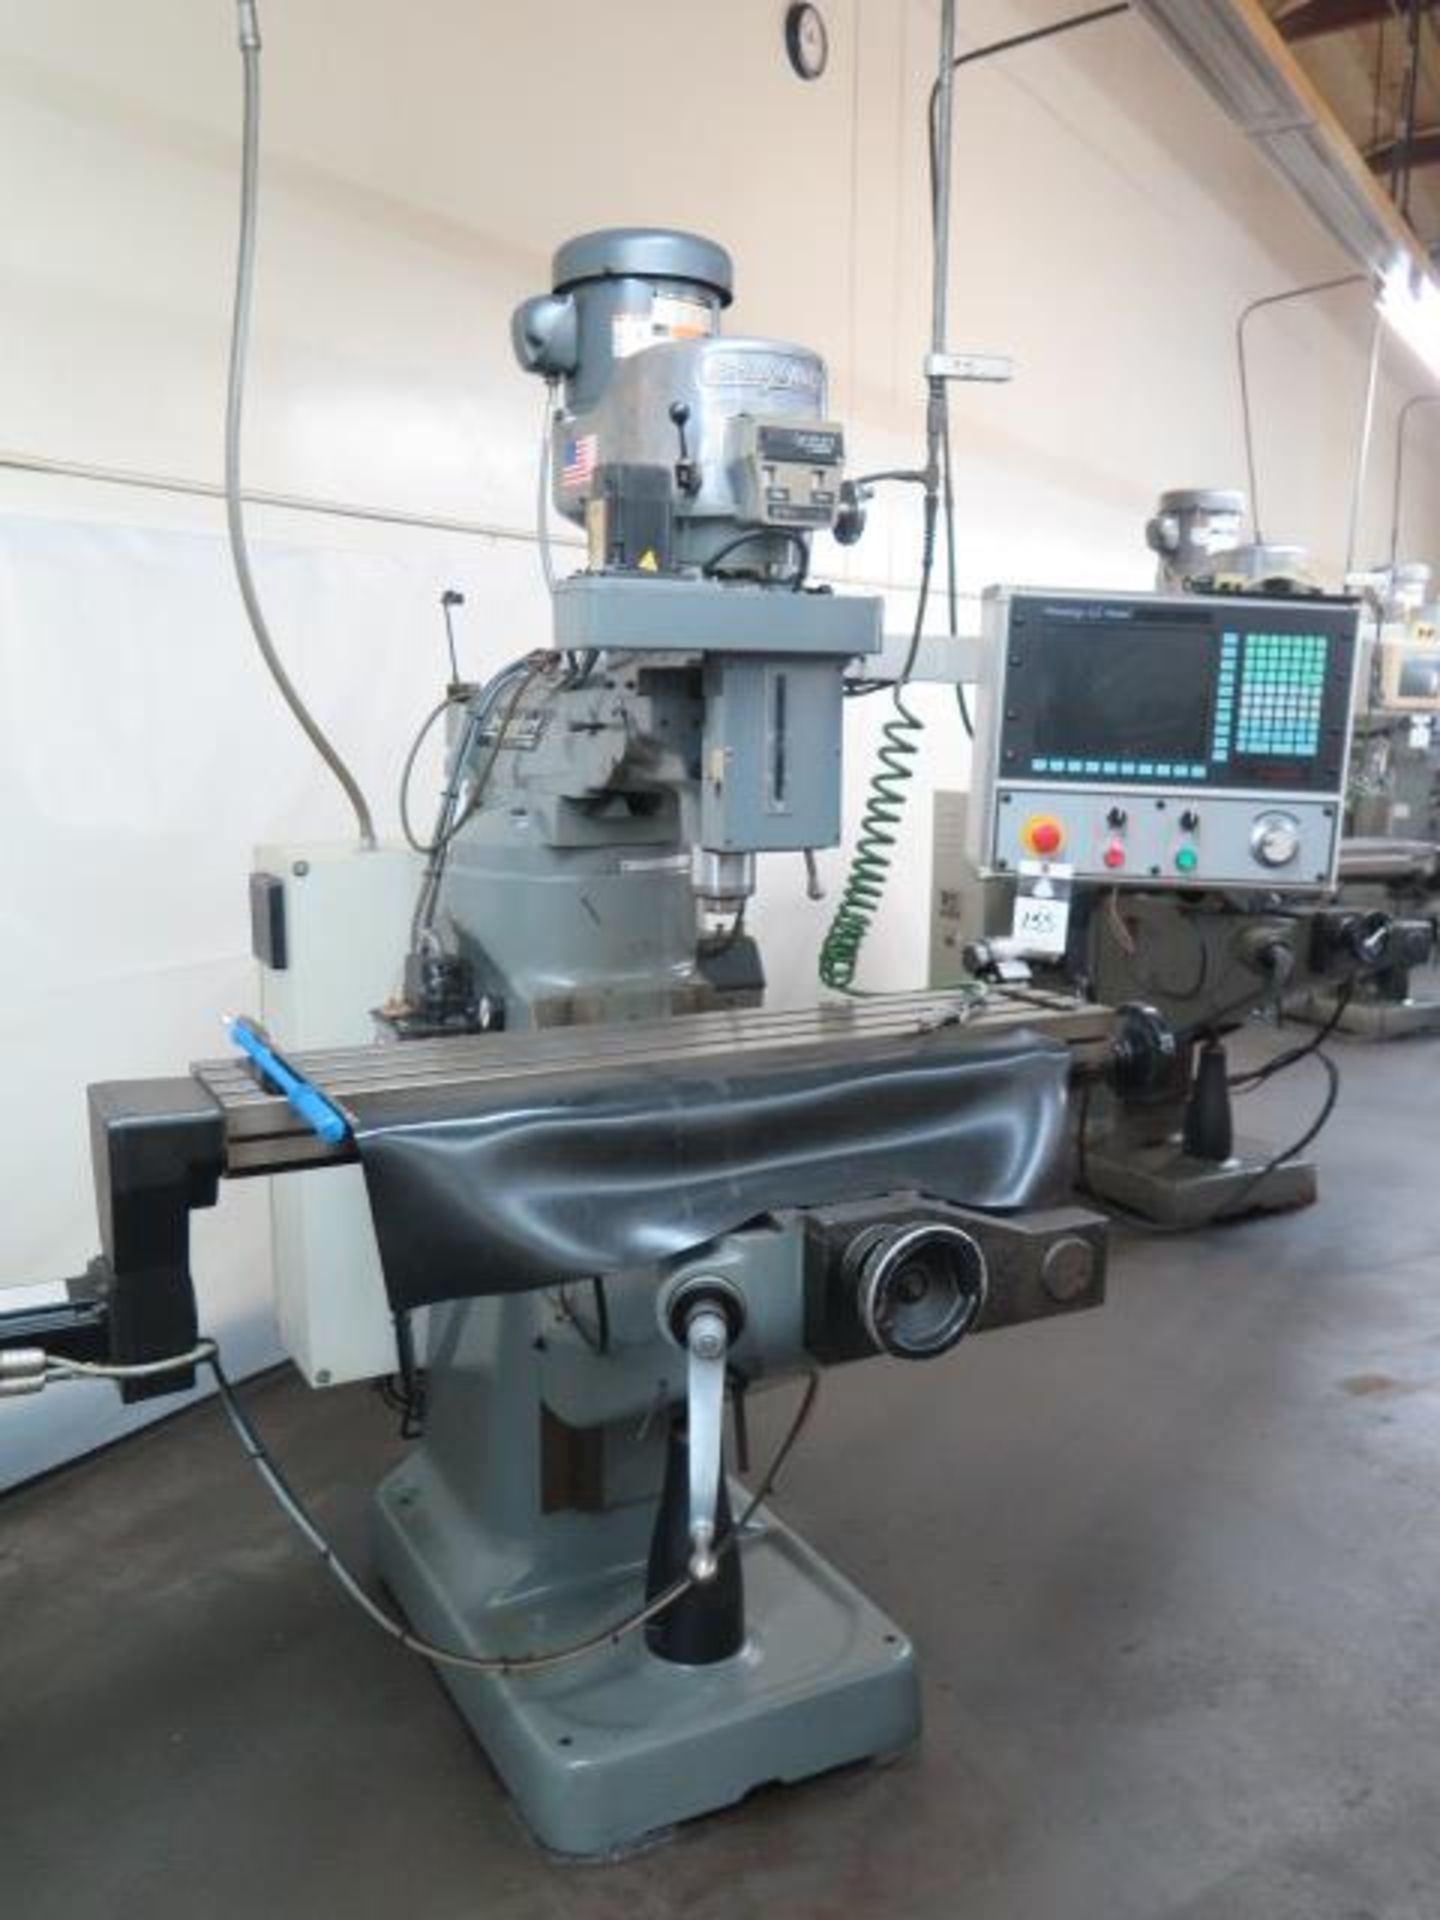 Bridgeport / Hardinge 3-Axis CNC Mill s/n HDNG2098FX w/ Hardinge EZ Vision Controls, 2Hp, SOLD AS IS